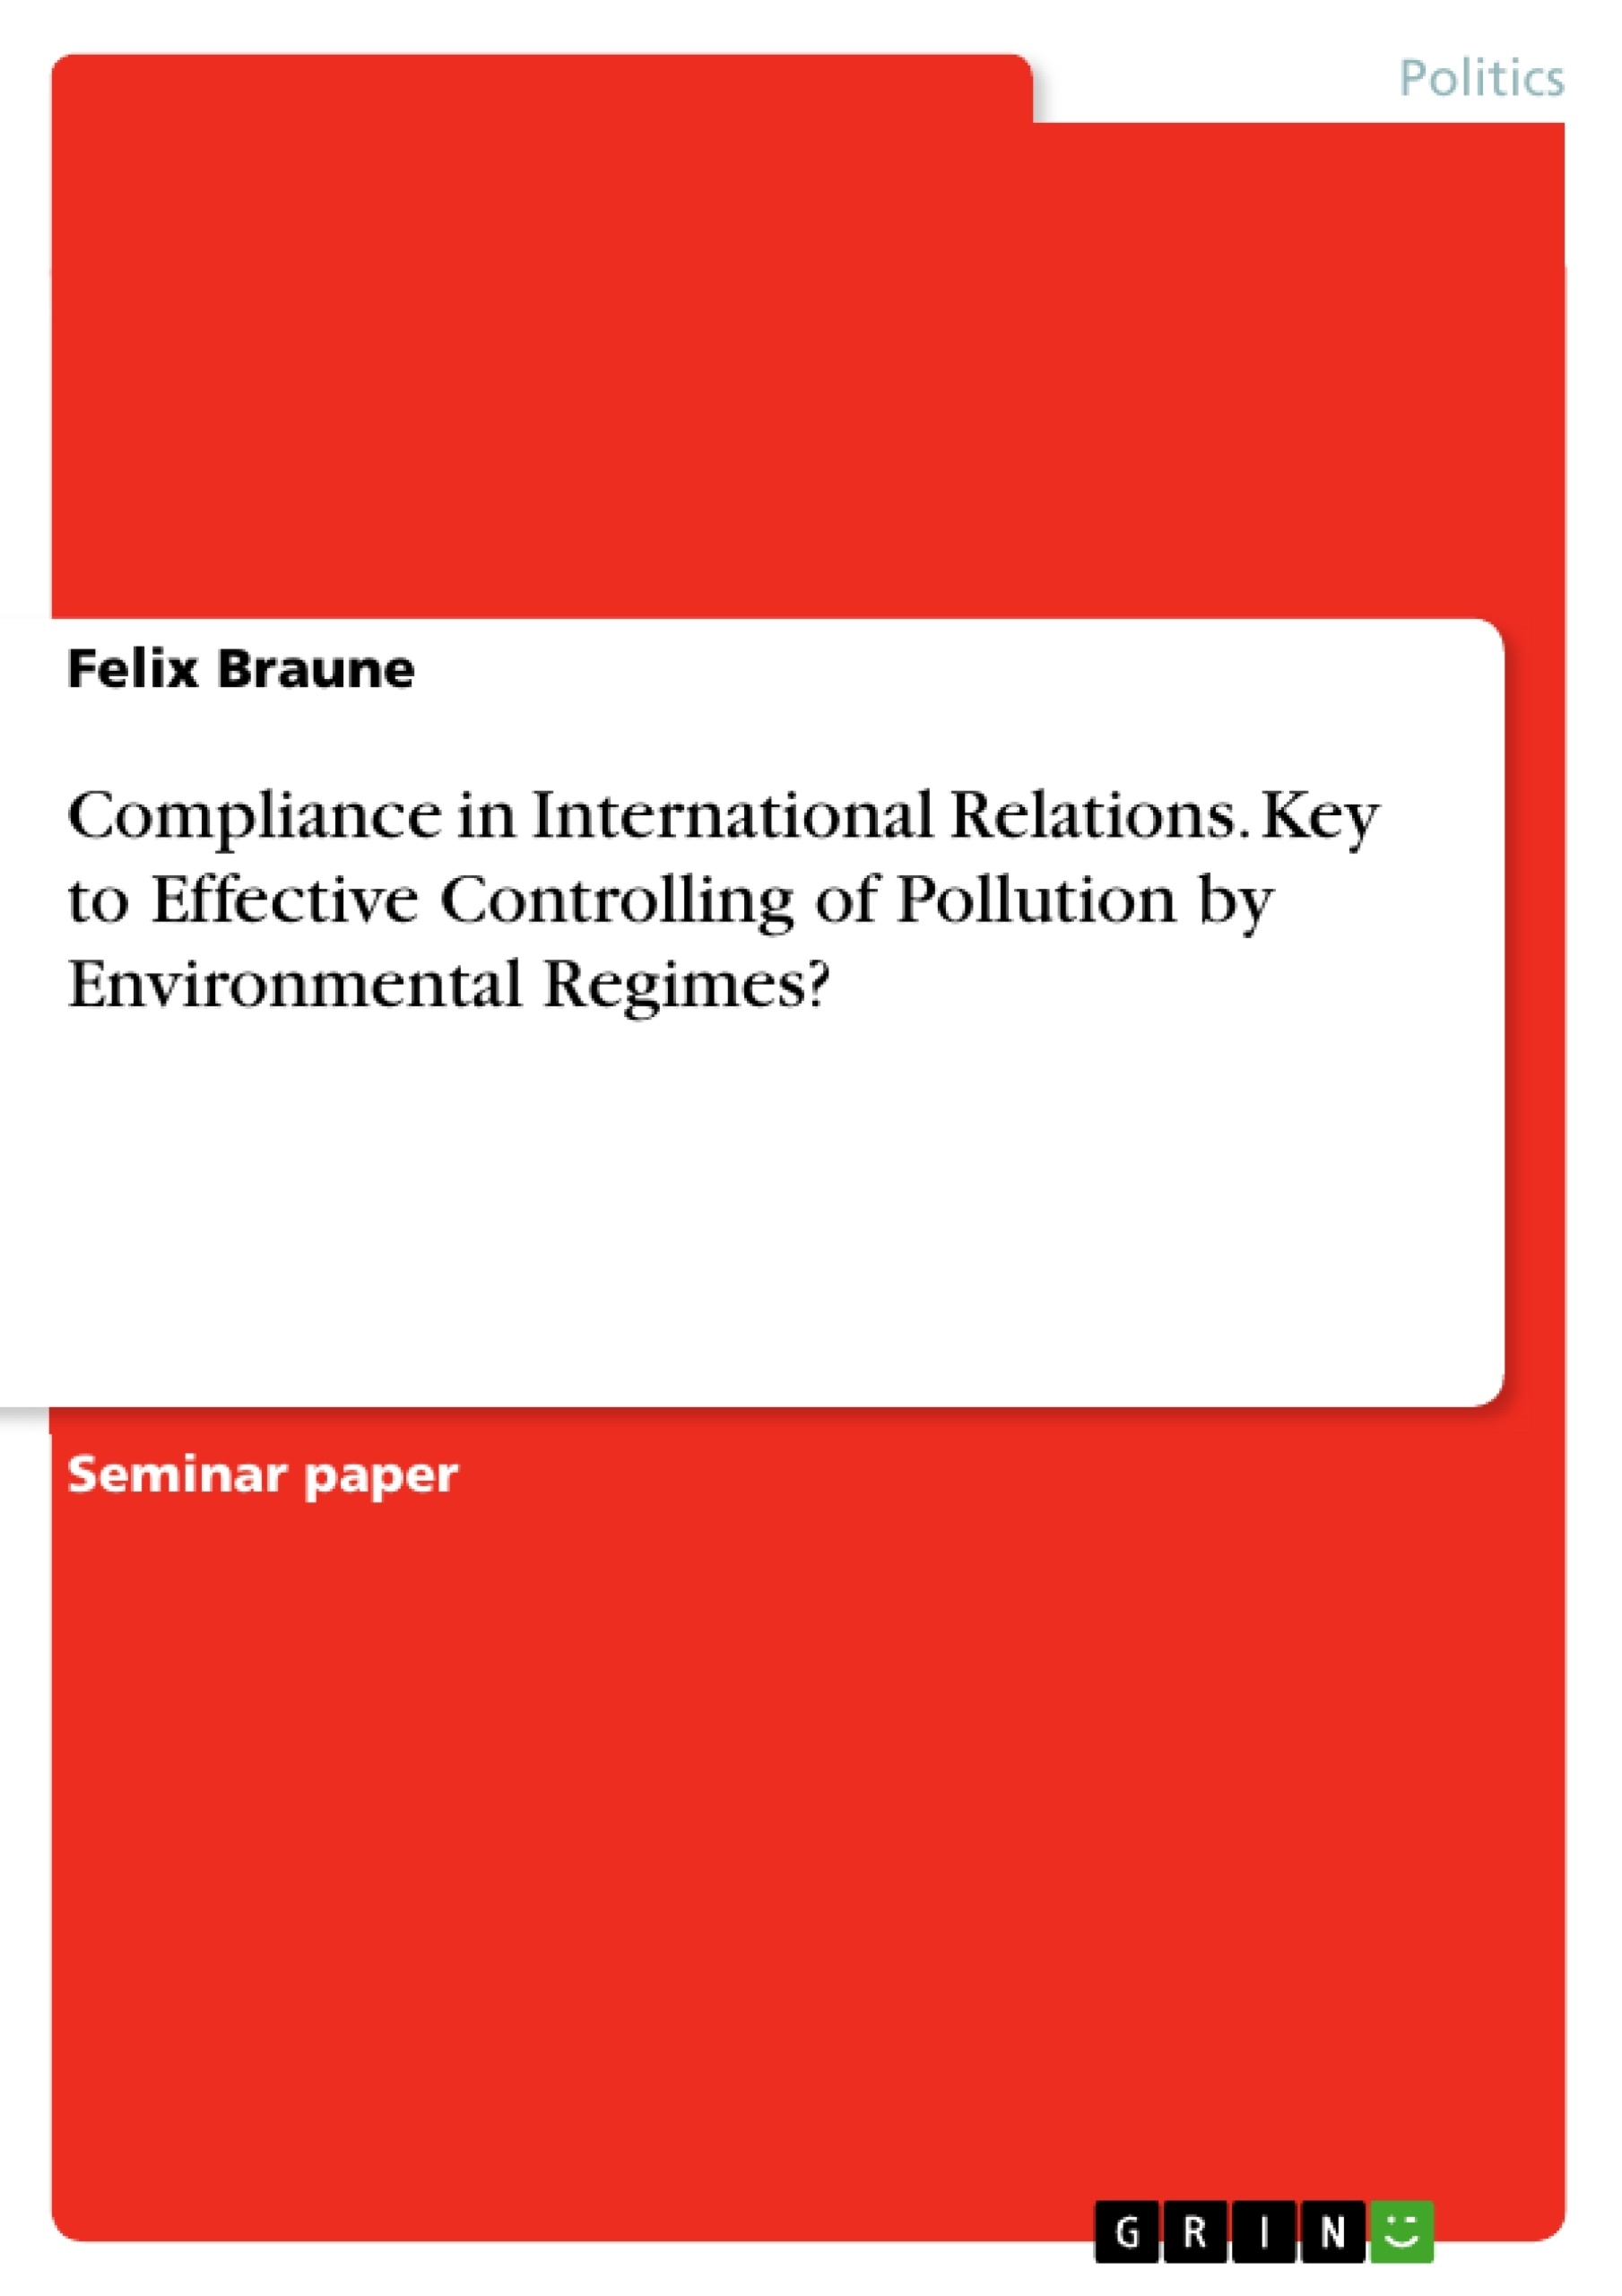 Titre: Compliance in International Relations. Key to Effective Controlling of Pollution by Environmental Regimes?